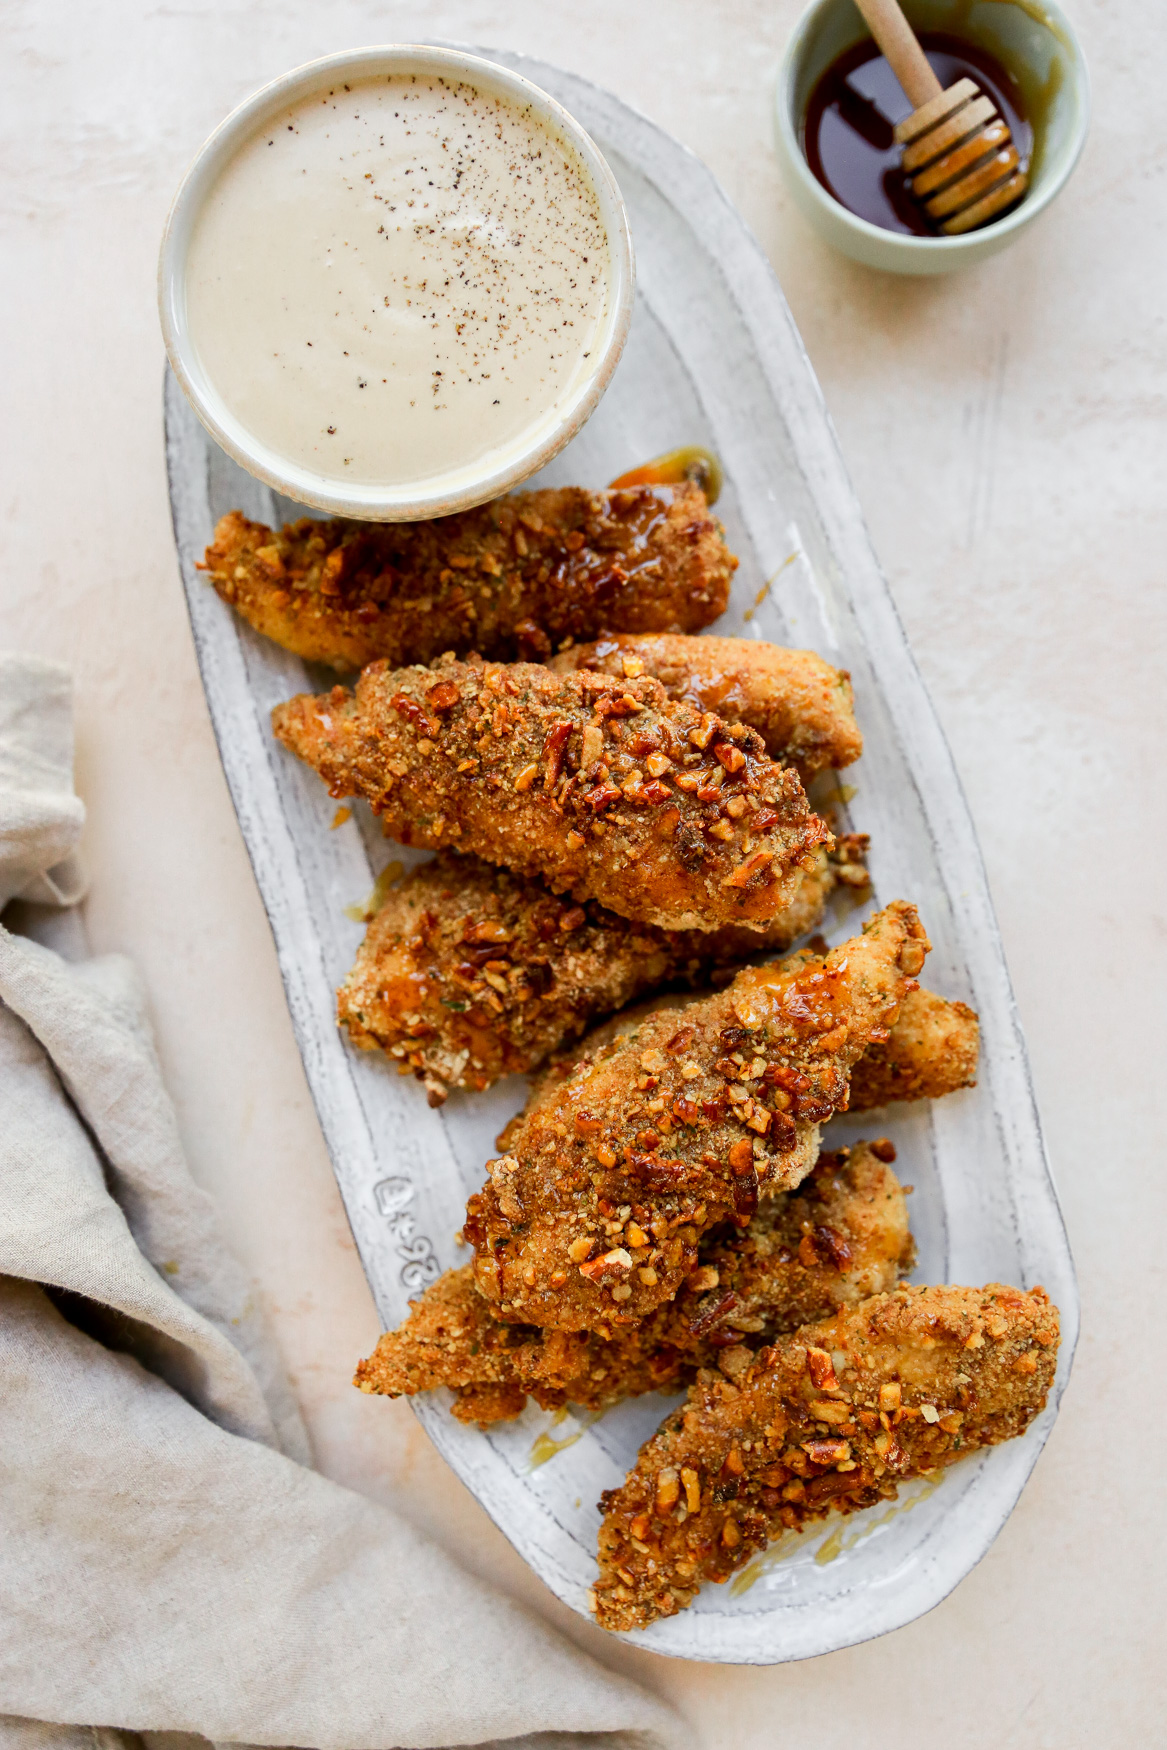 Pretzel Crusted Chicken Fingers with Honey Mustard Dipping Sauce